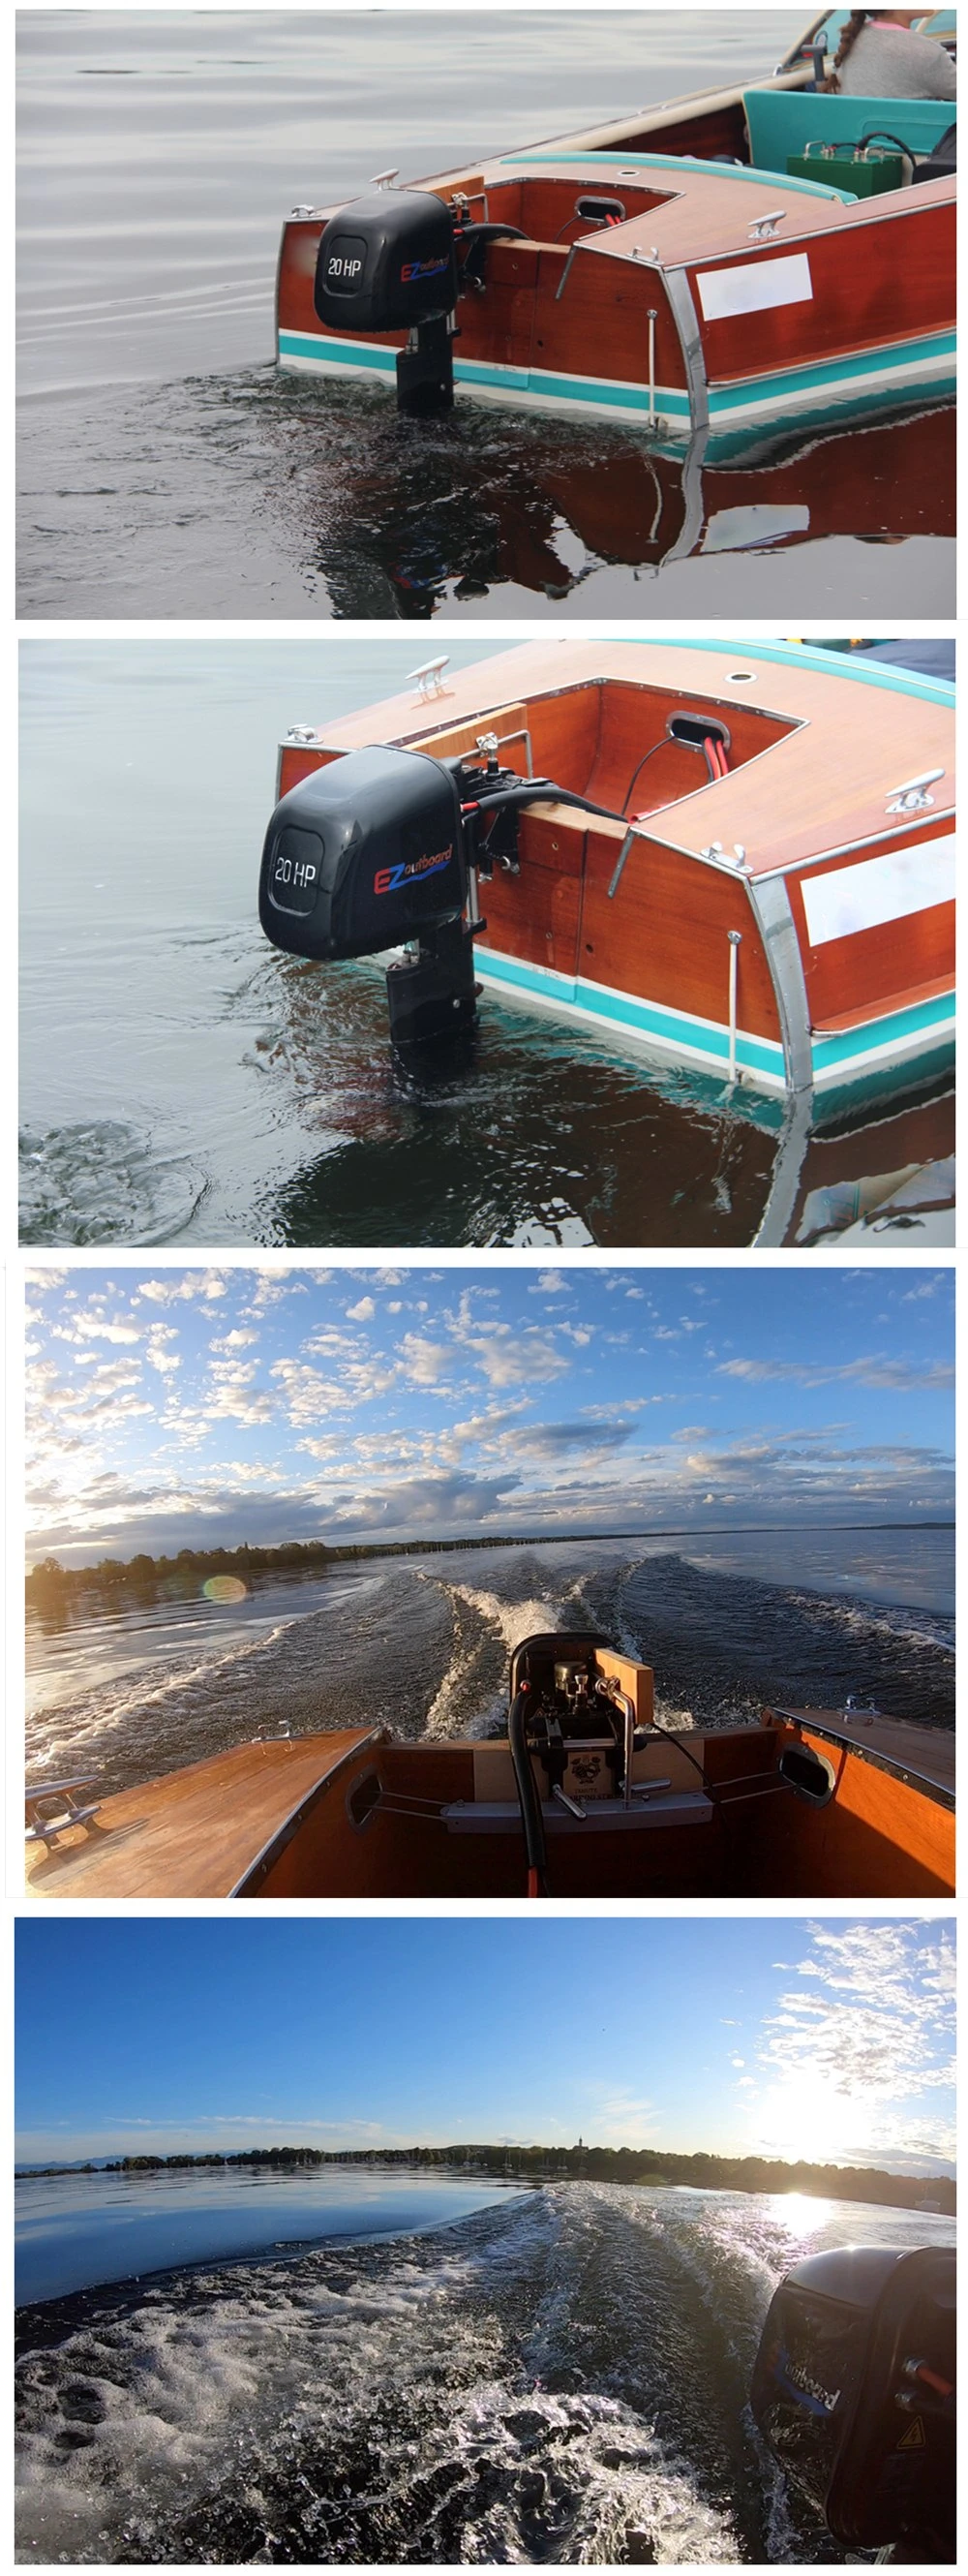 Golden Motor EZ outboard 3HP ,5HP ,10HP New outboard engine /outboard motor /Marine boat motor for dingy and tender boat